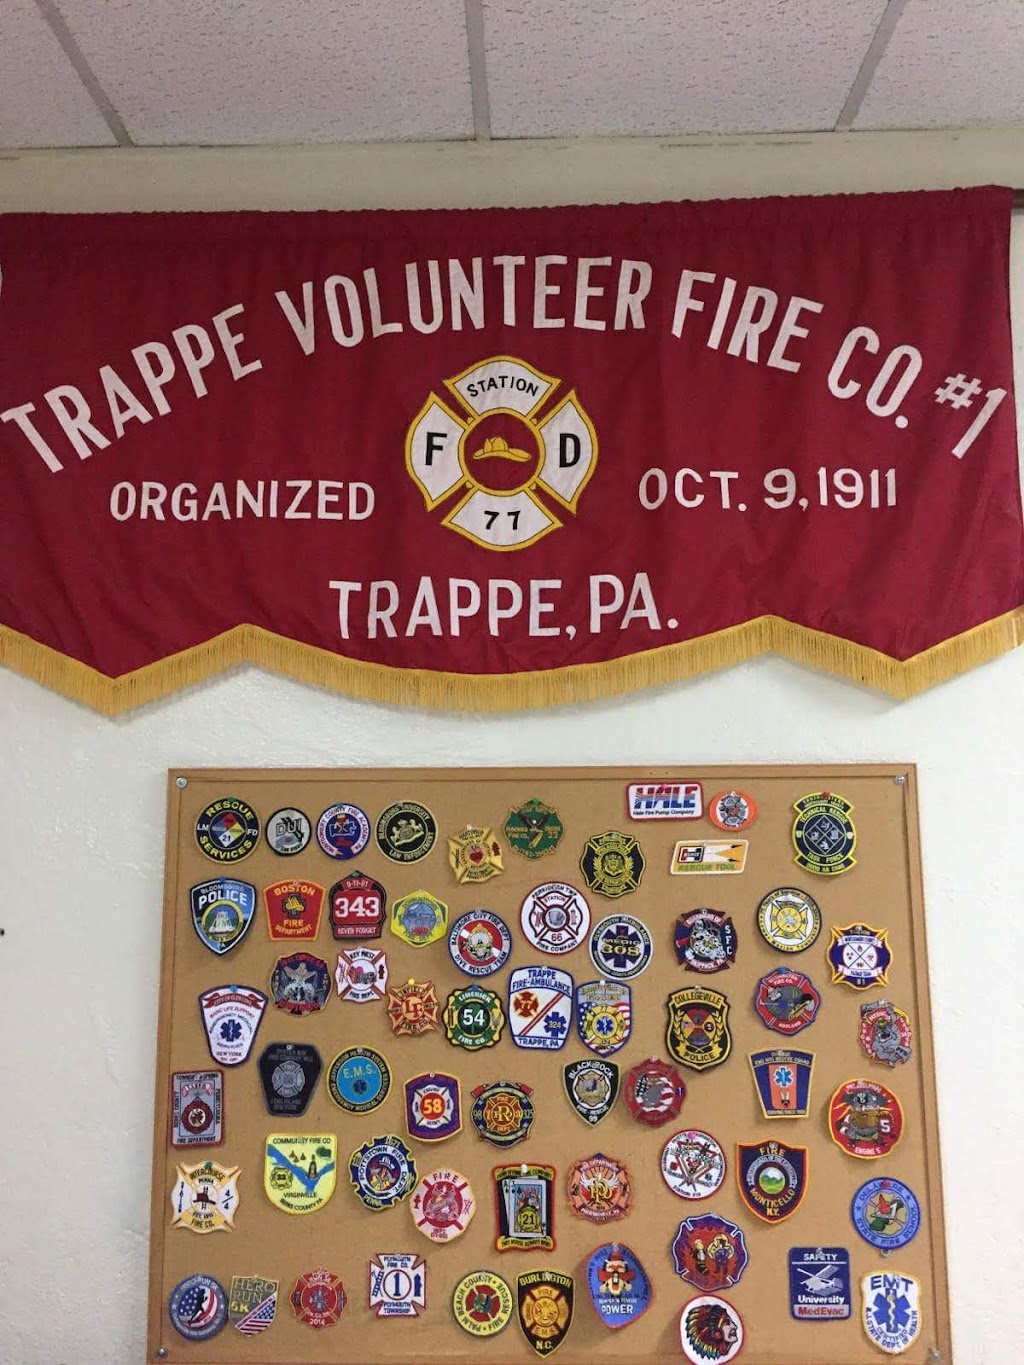 Trappe Fire Co | 20 W 5th Ave, Trappe, PA 19426 | Phone: (610) 489-2700